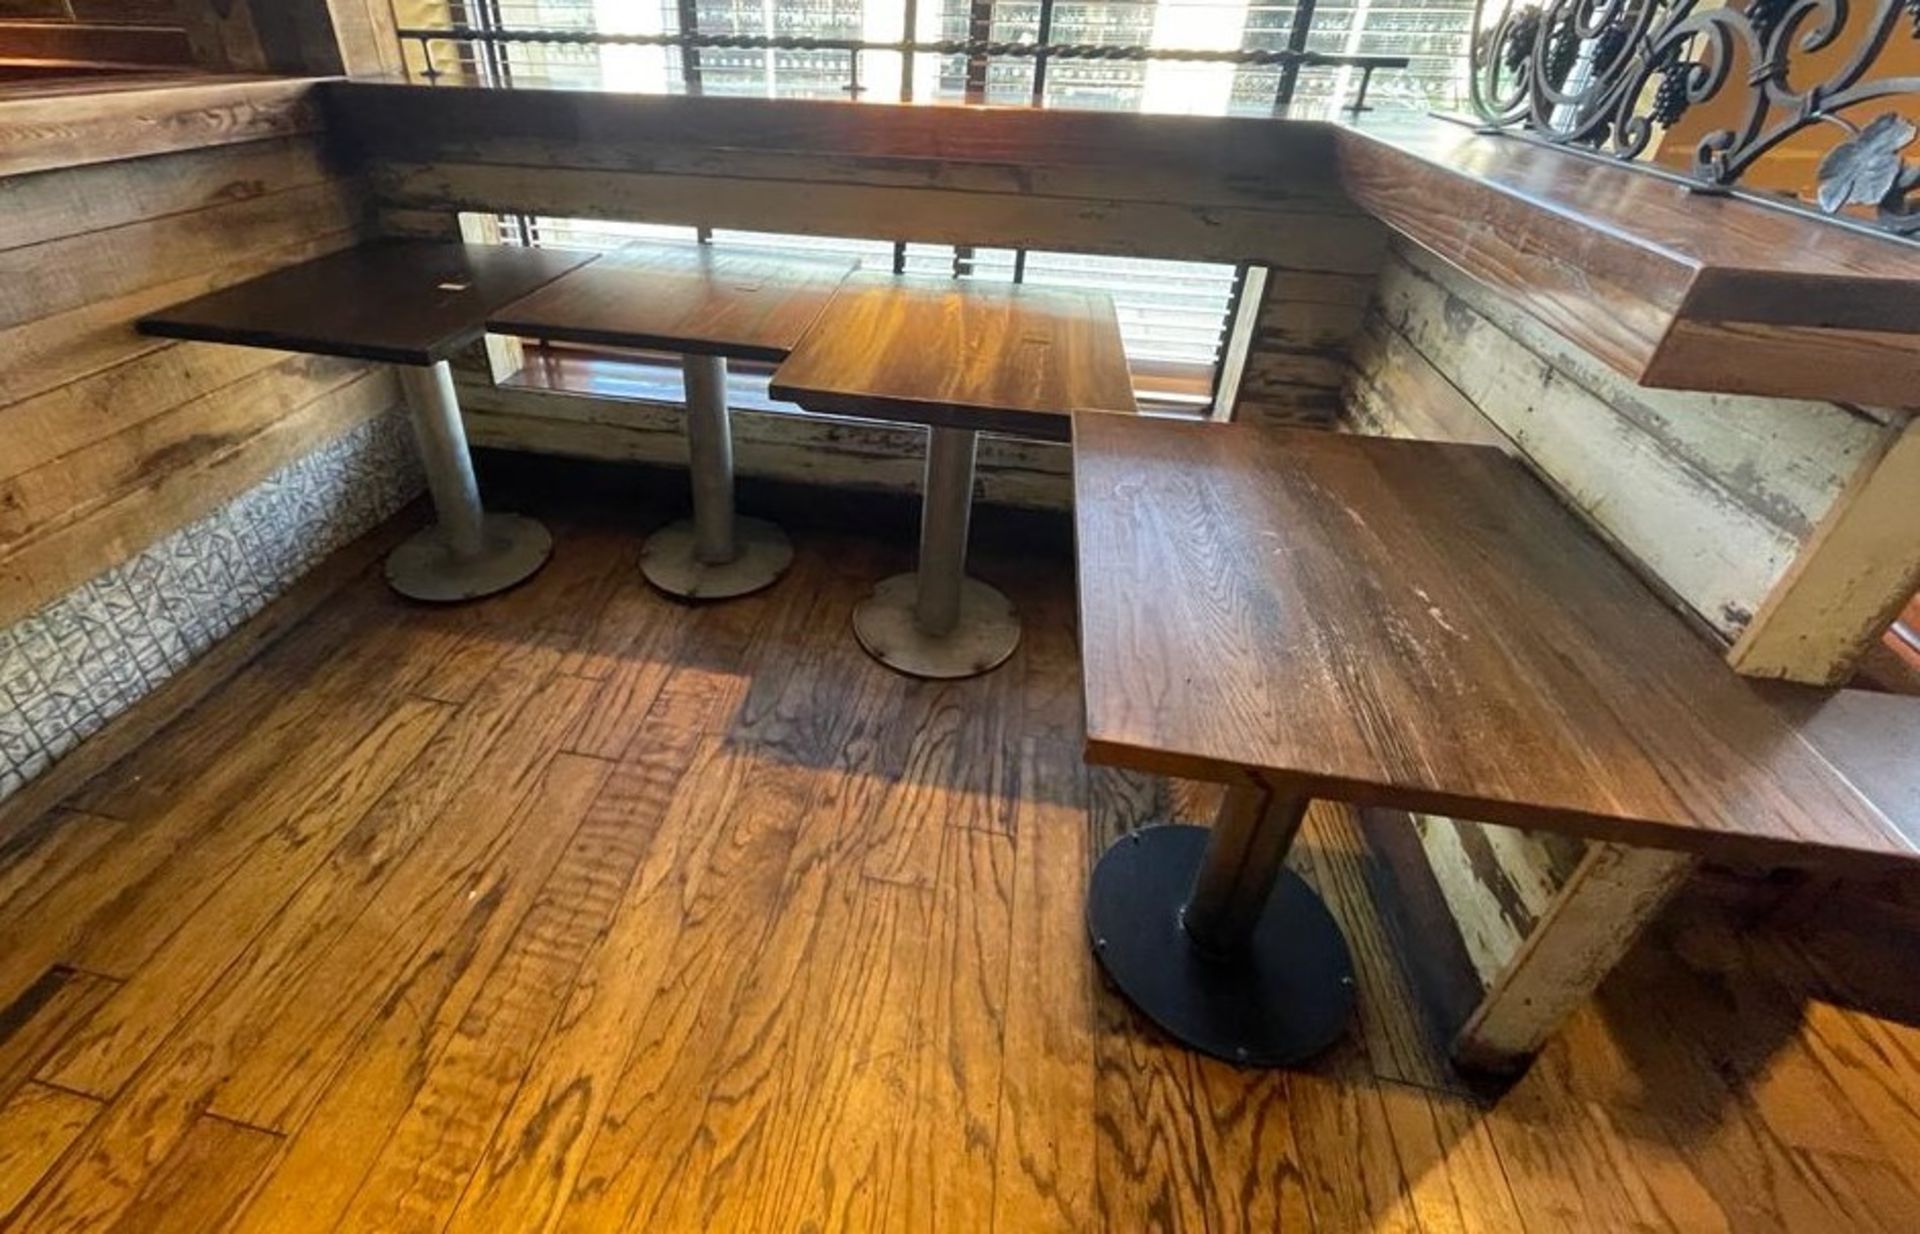 4 x Restaurant Dining Tables Featuring Industrial Style Bases and Wood Tops - Dimensions: H73 x - Image 4 of 9